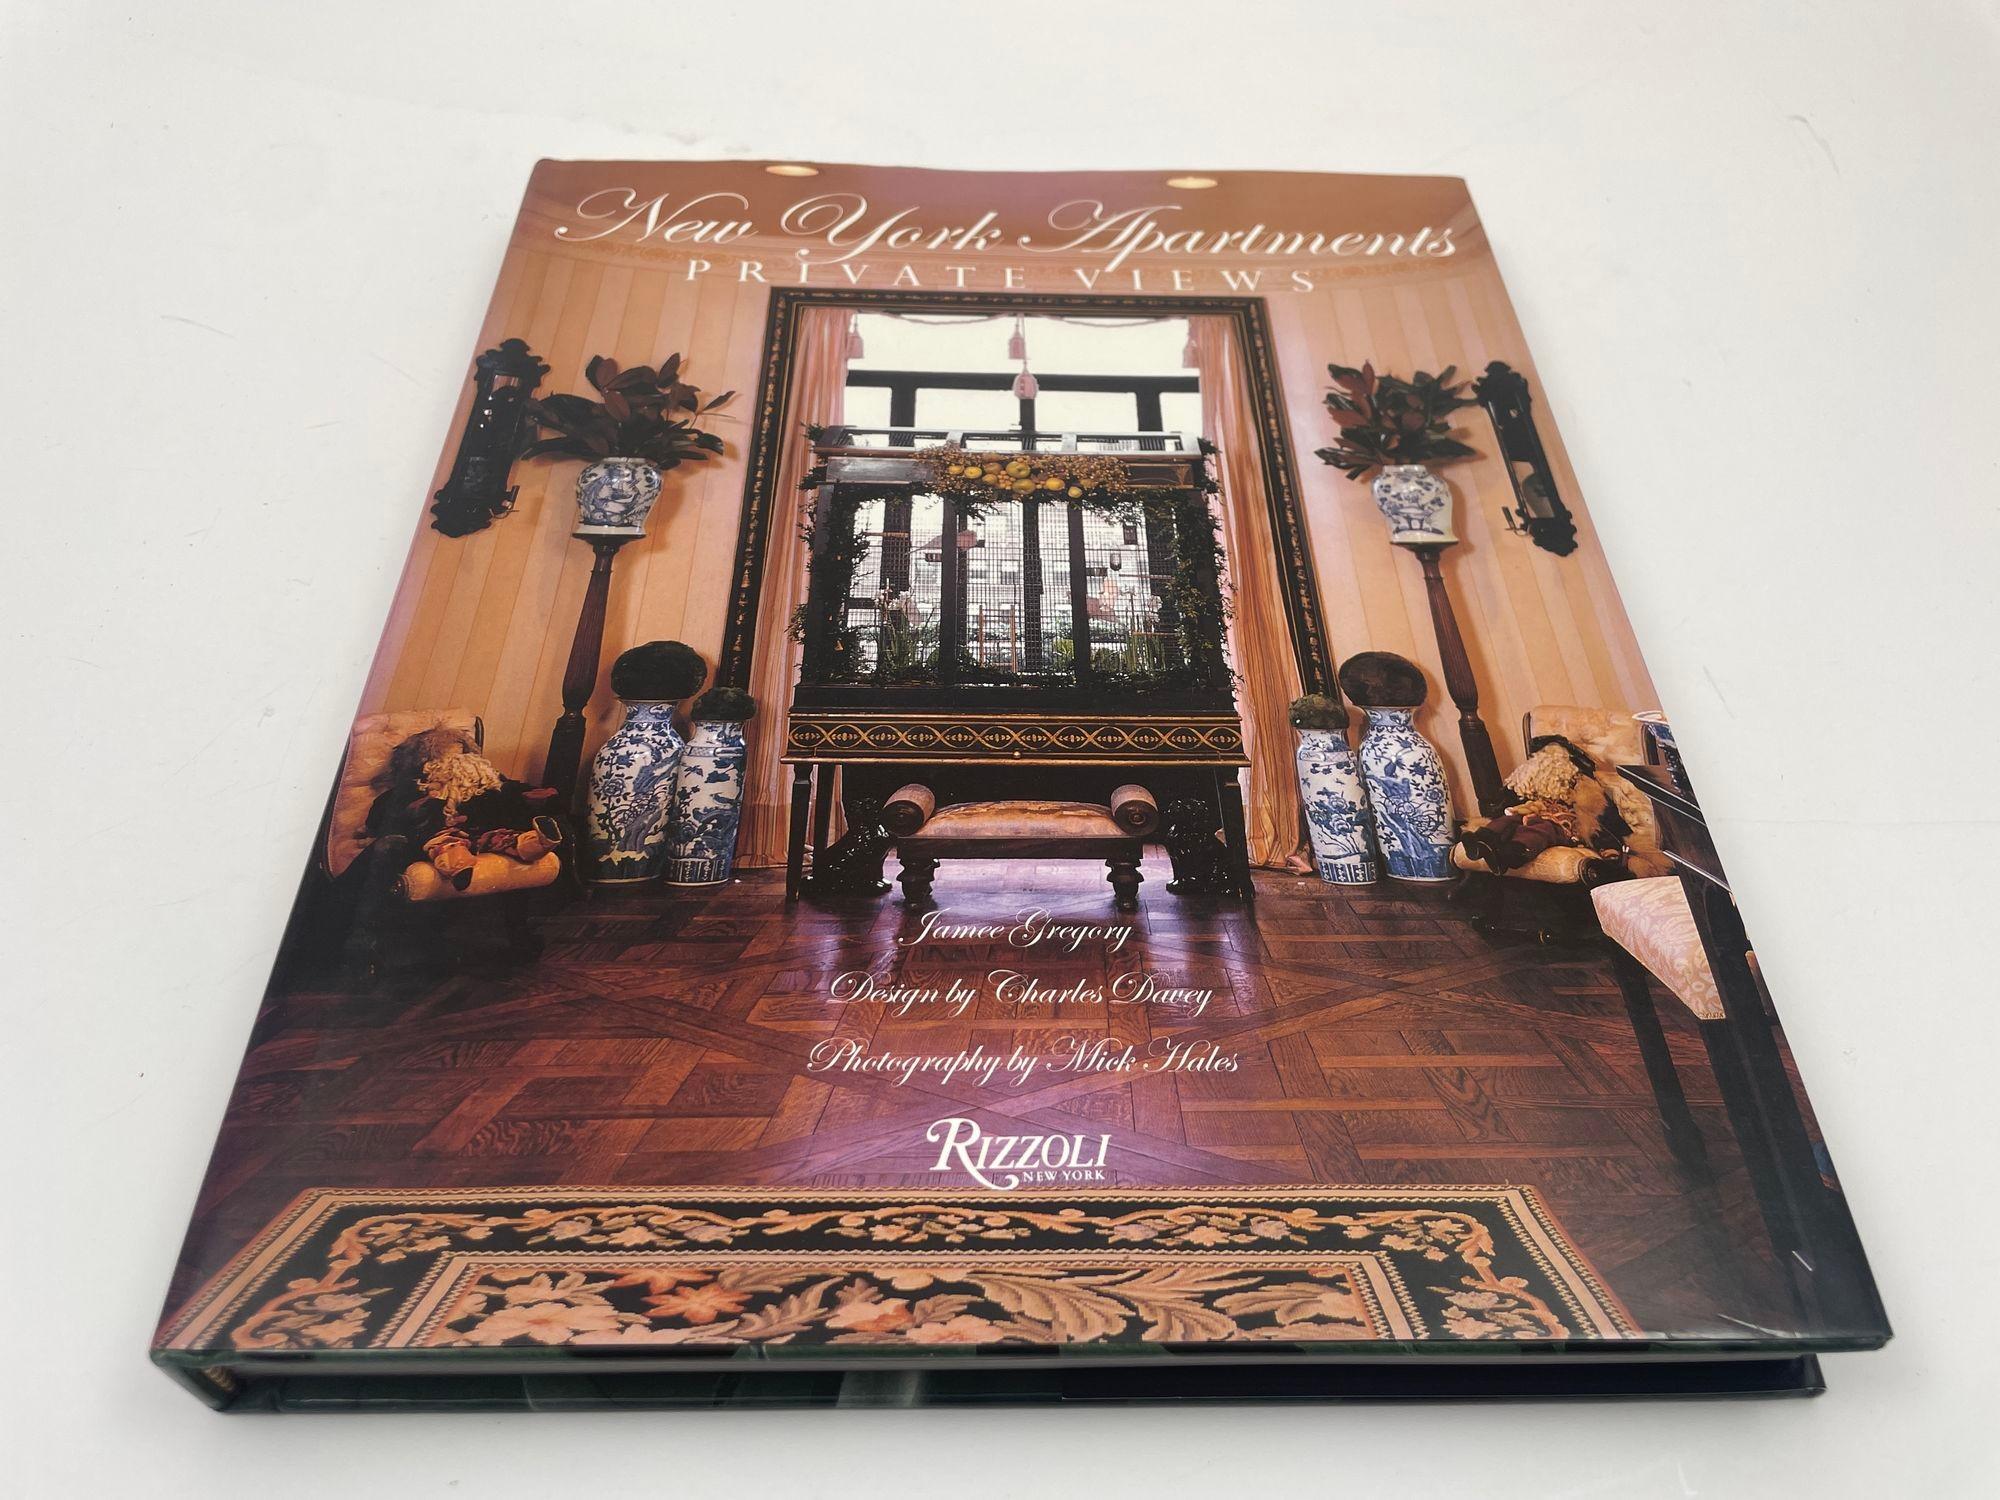 NEW YORK APARTMENTS Private Views by Jamee Gregory & Charles DaveyNew York: Rizzoli, 2004. First Edition; First Printing. Hardcover.
New York Apartments: Private Views is a lavishly illustrated book that takes readers on a tour of some of the most